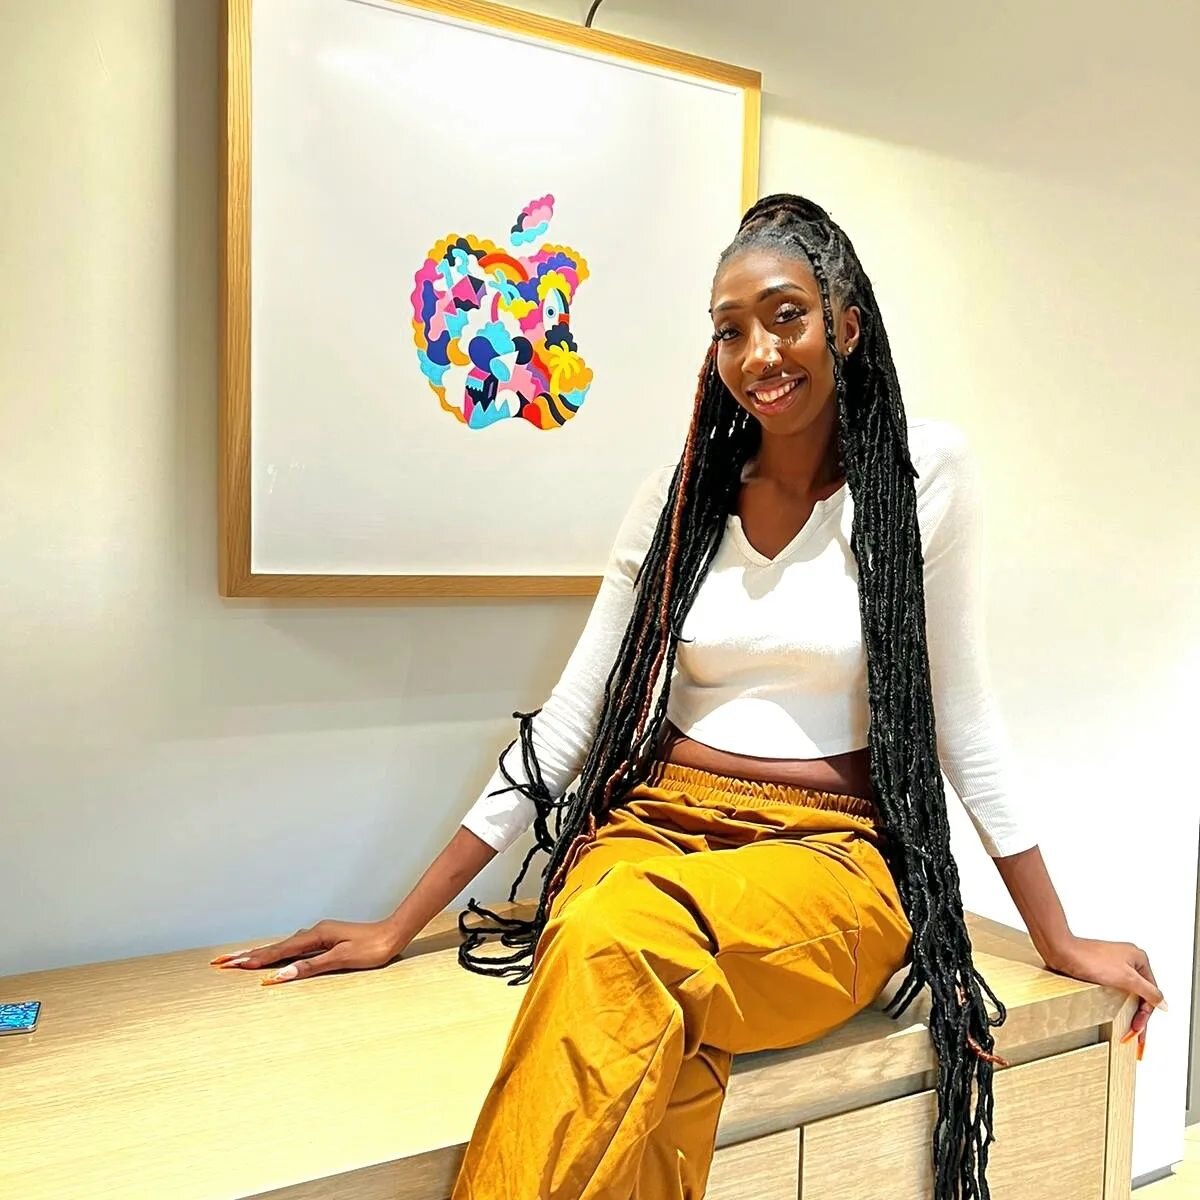 In 2018 I sat in my office manifesting that one day I'd host a Digital Art Therapy workshop for Apple. I didn't know how I'd do it but I knew I would...

Yesterday, I held a Digital Art Therapy workshop at Apple!!! It was everything I dreamed of and 